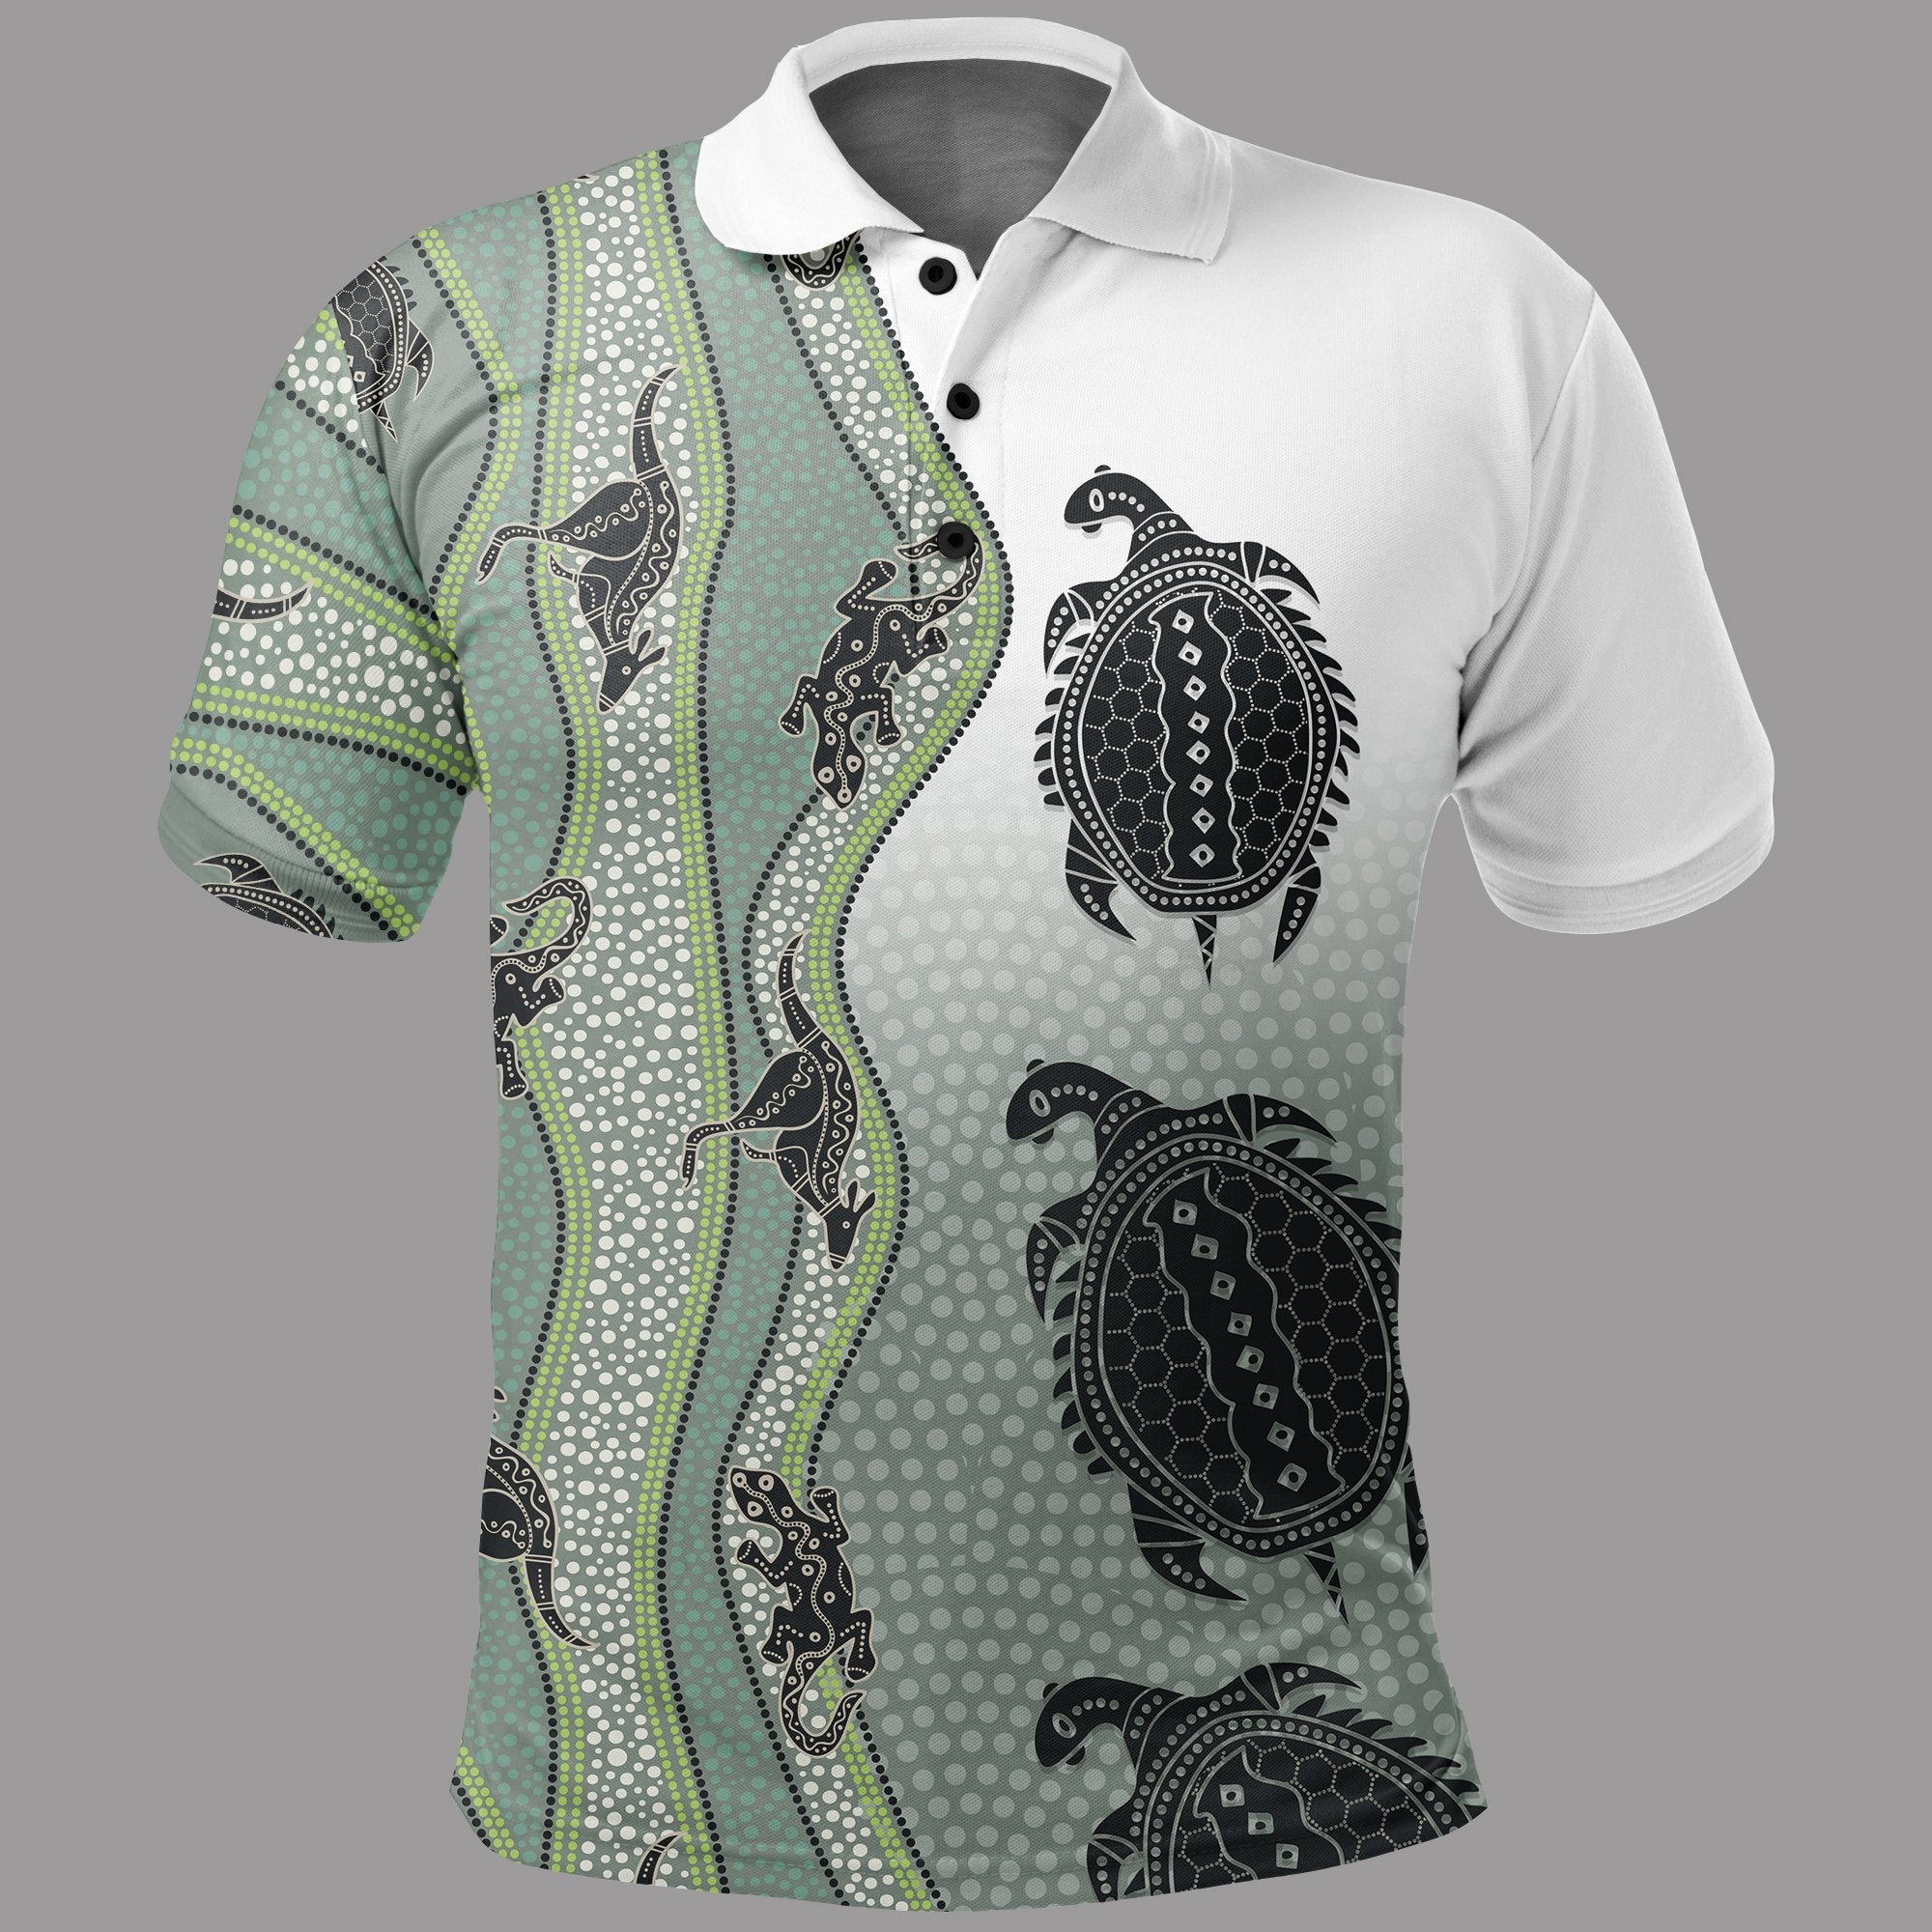 polo-shirt-aboriginal-with-kangaroo-lizard-turtle-and-dotted-crooked-stripes-pattern